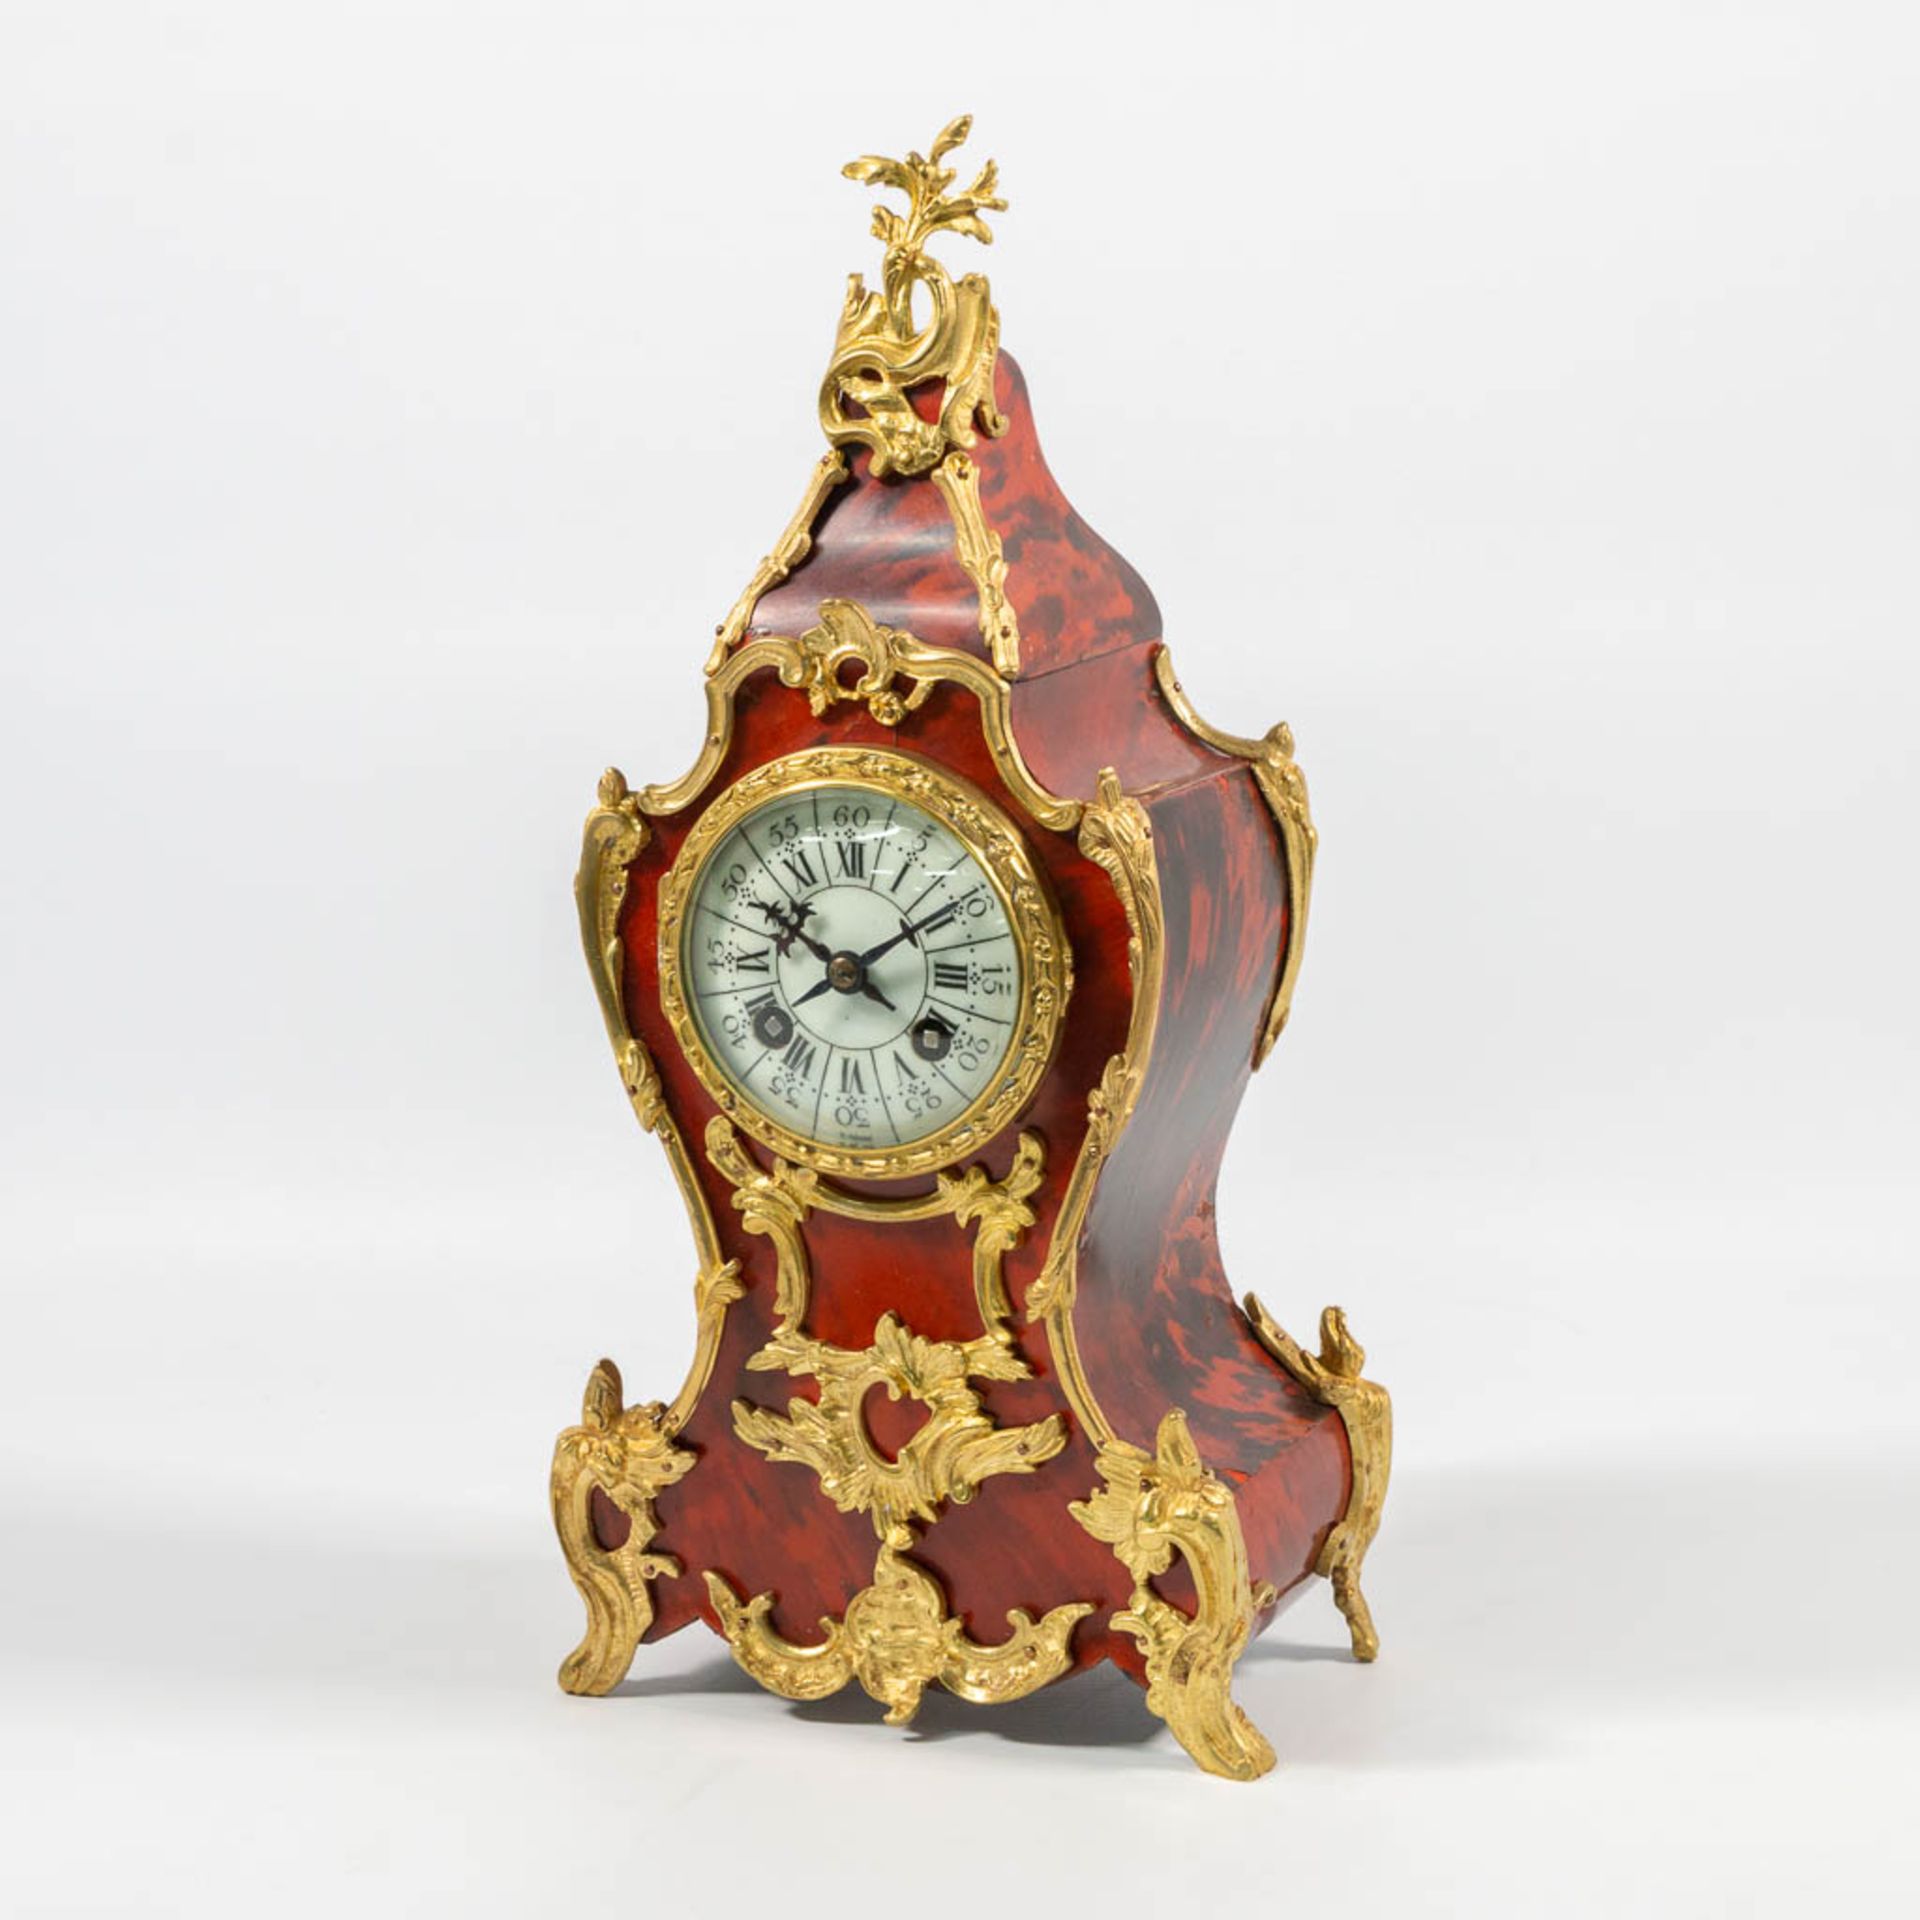 A Table clock made of wood decorated with Tortoise shell and Mount - Image 7 of 16